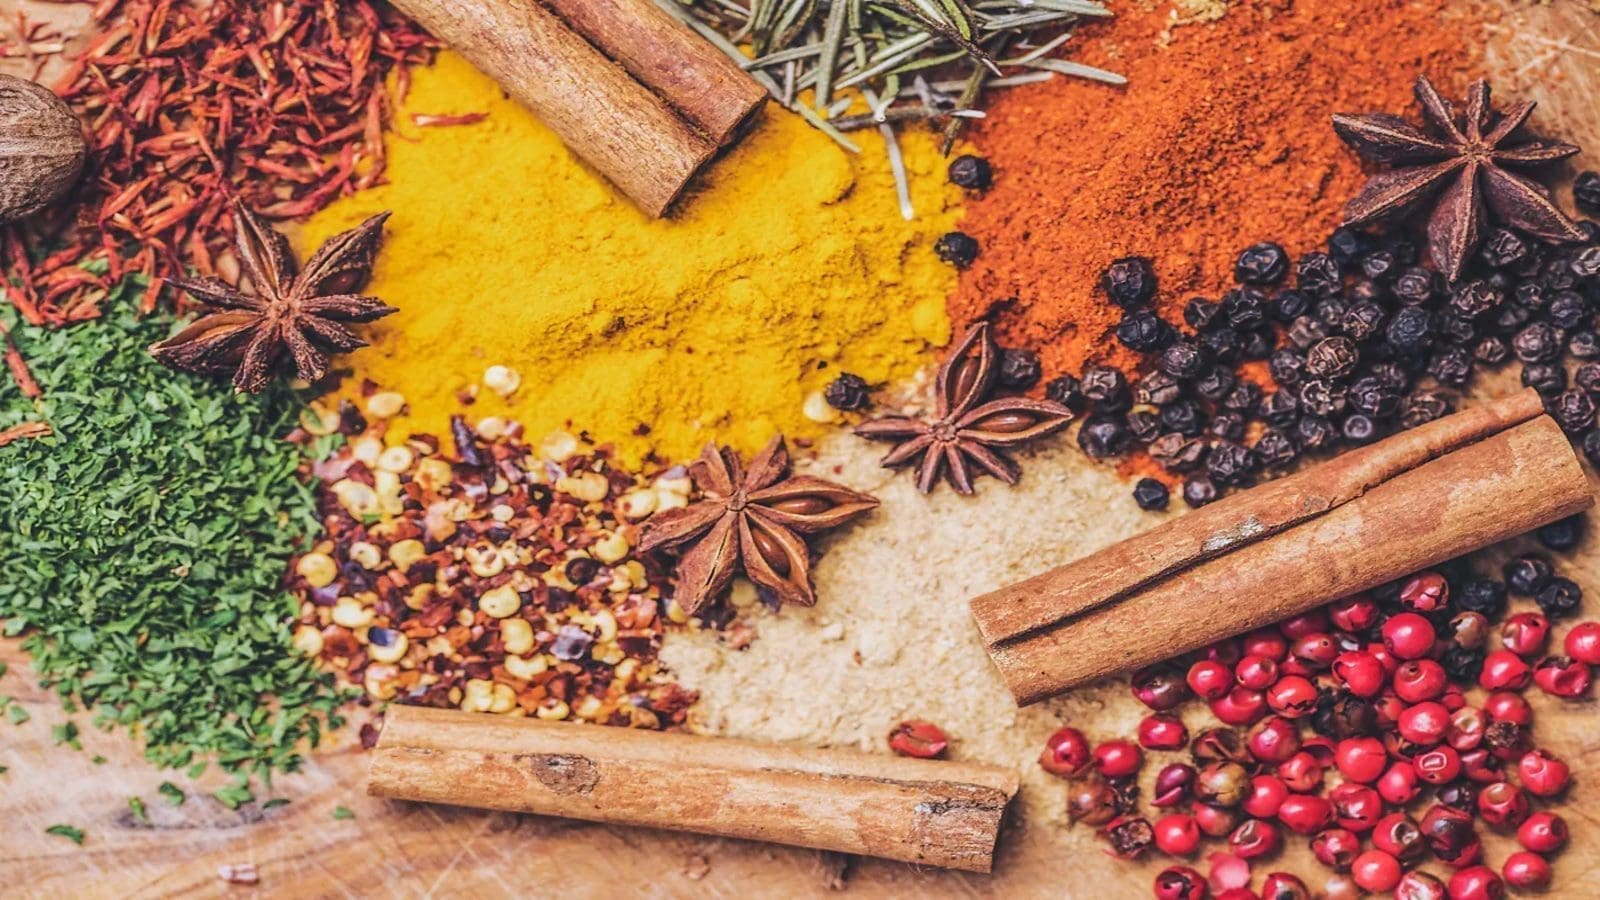 Florida based spice company’s products seized over unsanitary practices